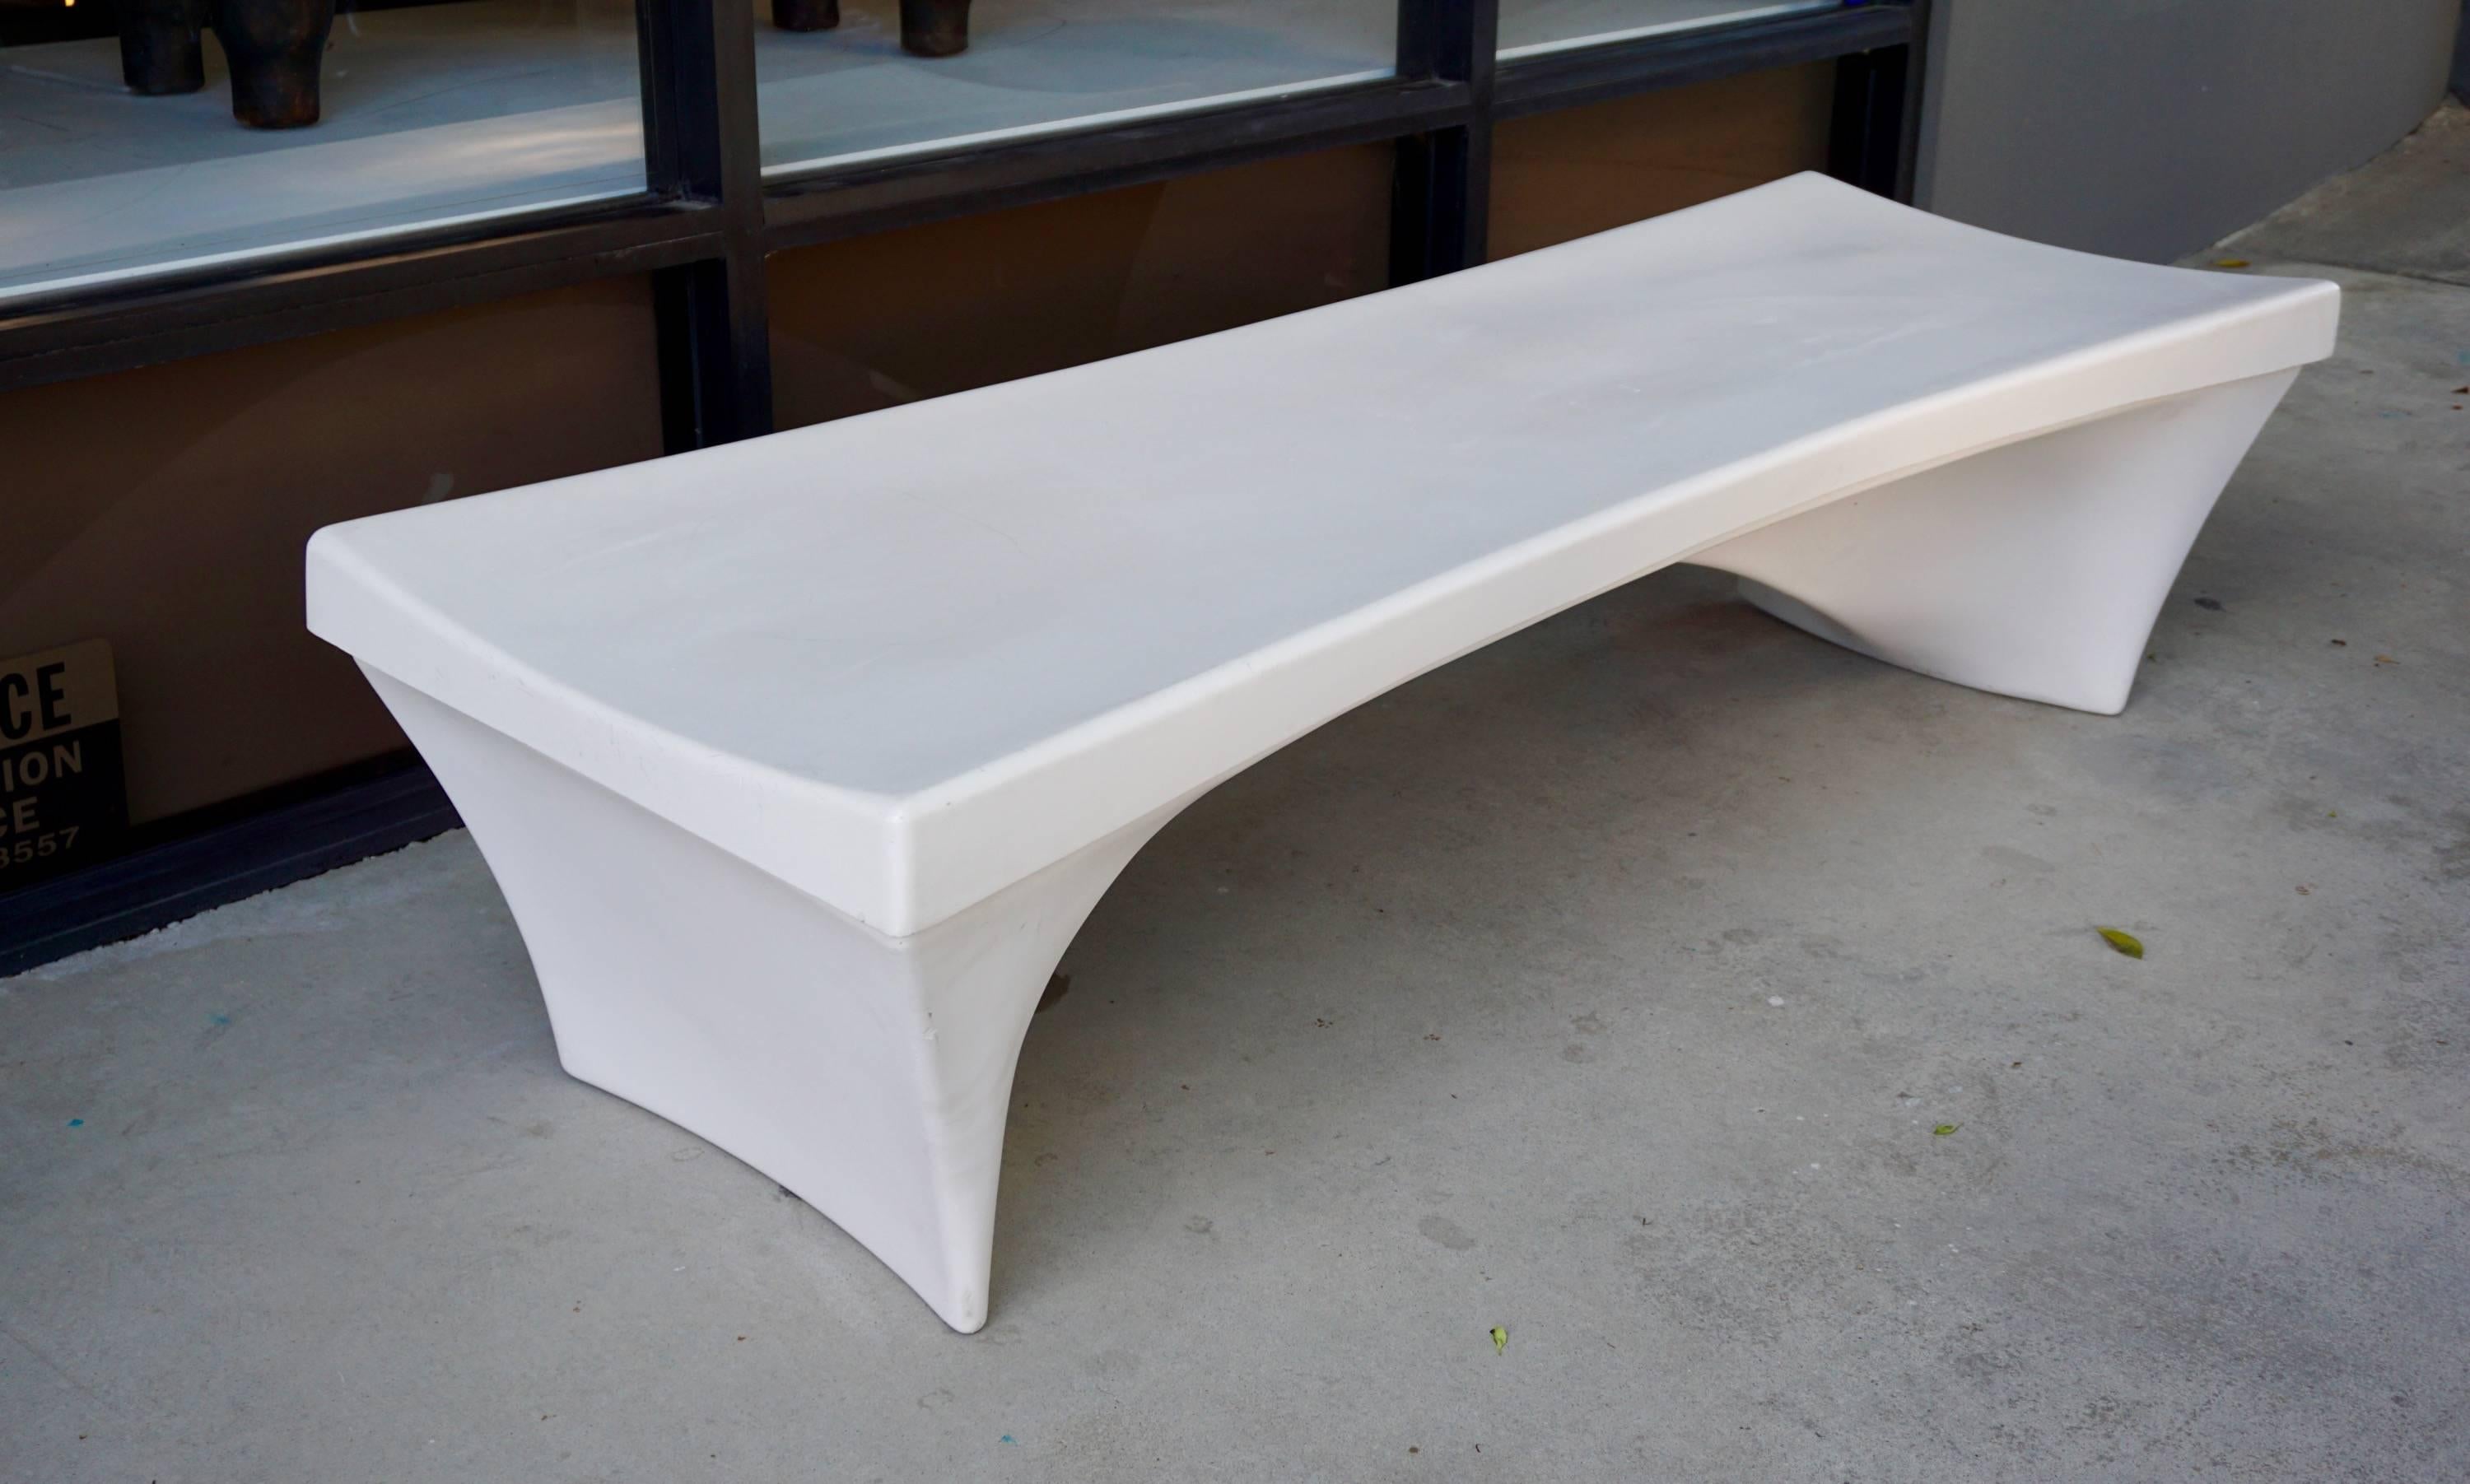 Designed by Deeds for Architectural Fiberglass. A statement piece poolside or in the garden.